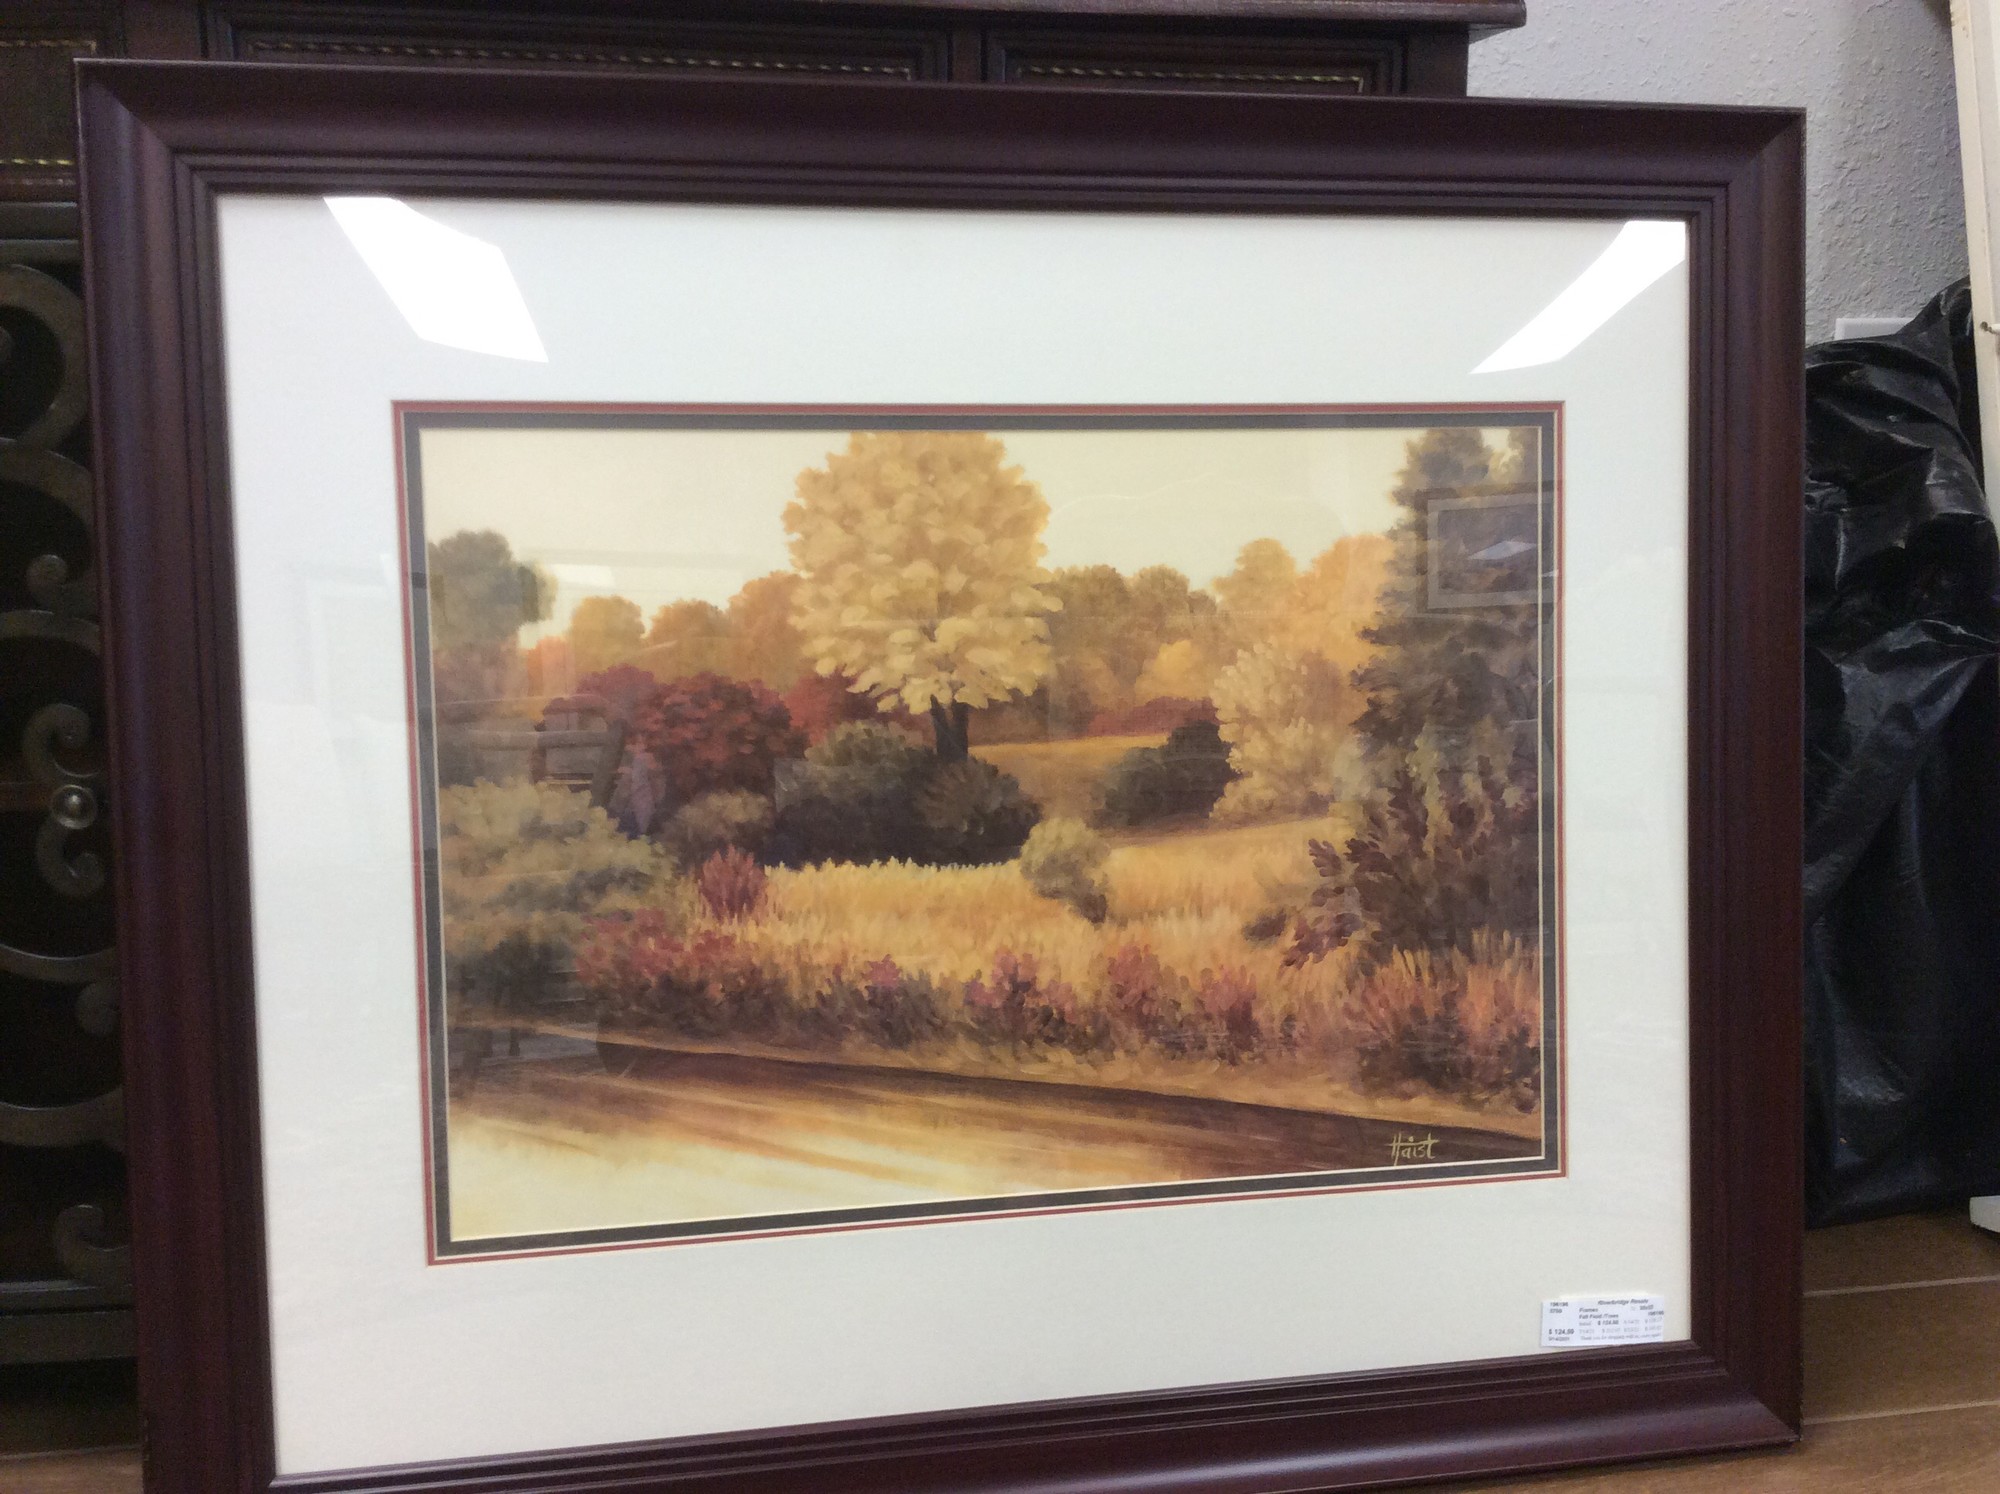 Beautiful Autumn trees in this framed picture by Haist.
It has a dark brown frame with a three layered matting which sets this picture off!
Measures- 38x32